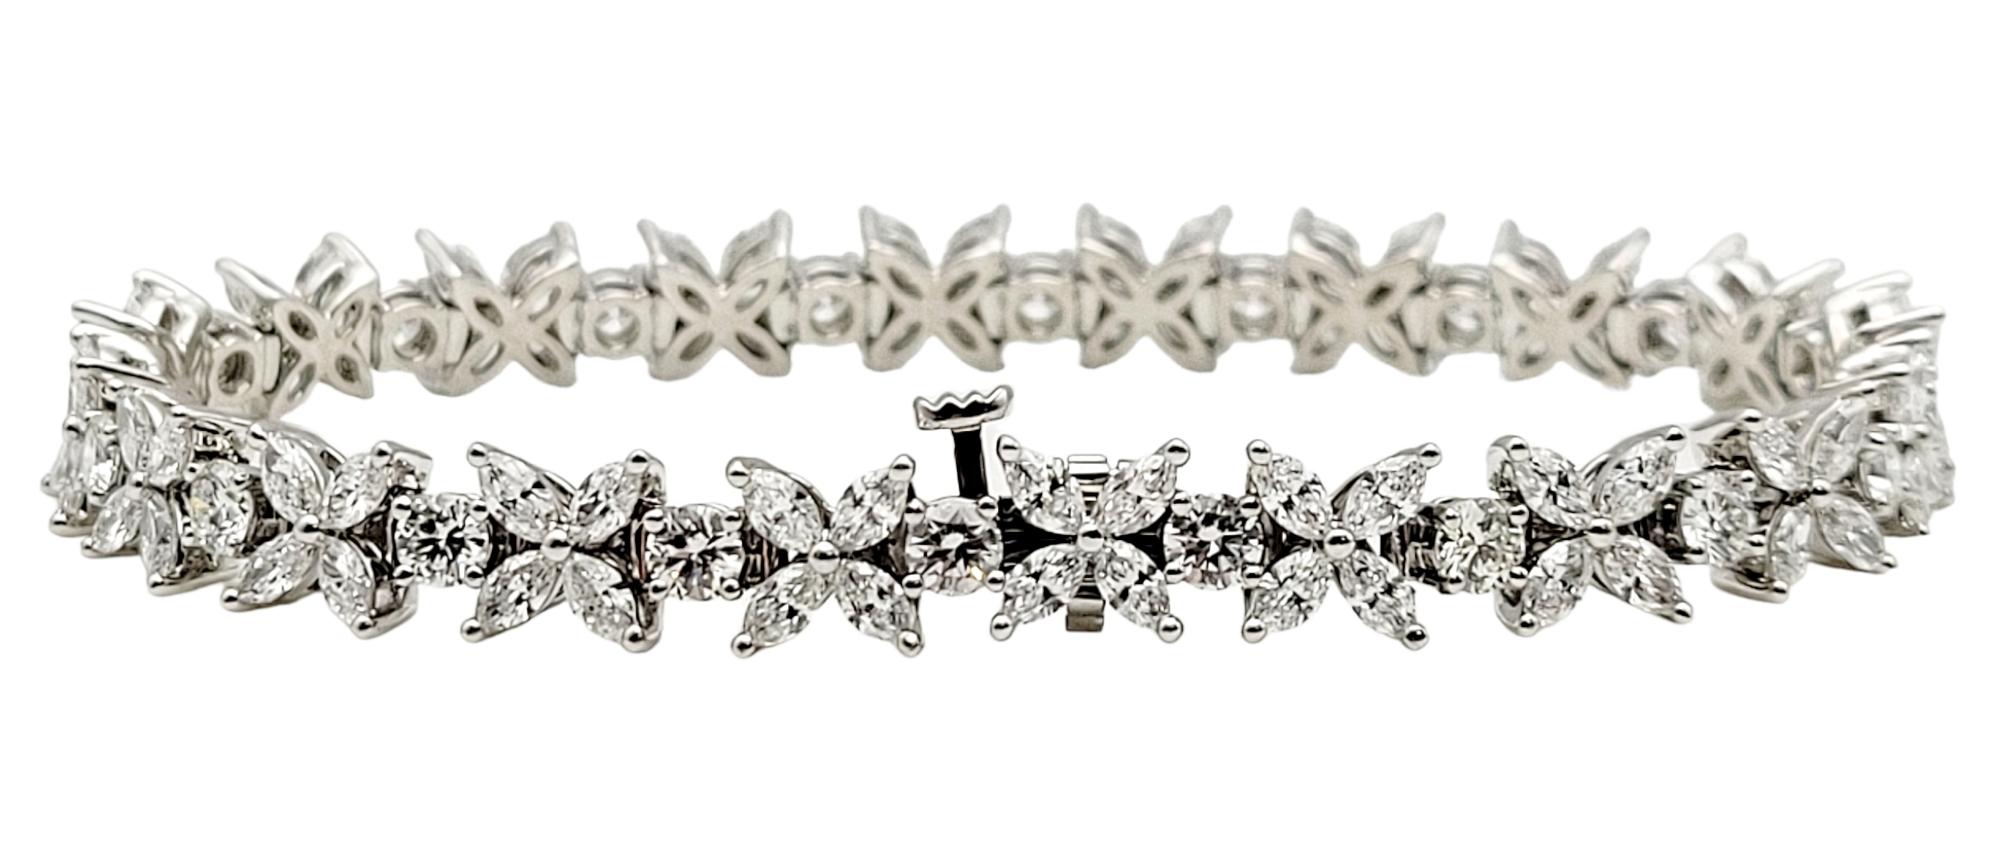 Elevate your designer jewelry collection with this exquisite Tiffany & Co. Victoria Cluster Diamond Tennis Bracelet. Founded in 1837 in New York City, Tiffany & Co. is one of the world's most storied luxury design houses recognized globally for its